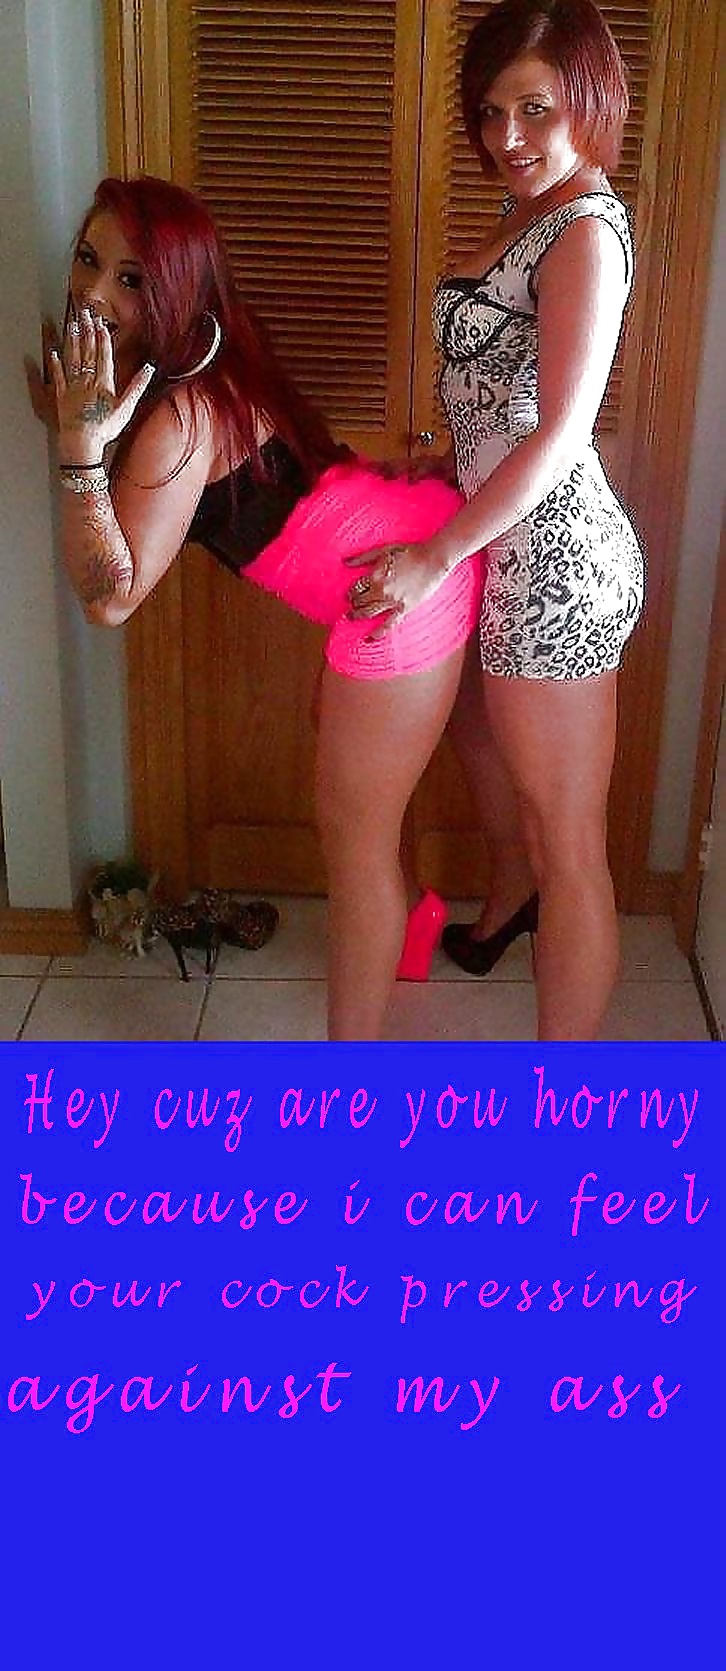 Captions from the mind of a sissy 2 #31435105